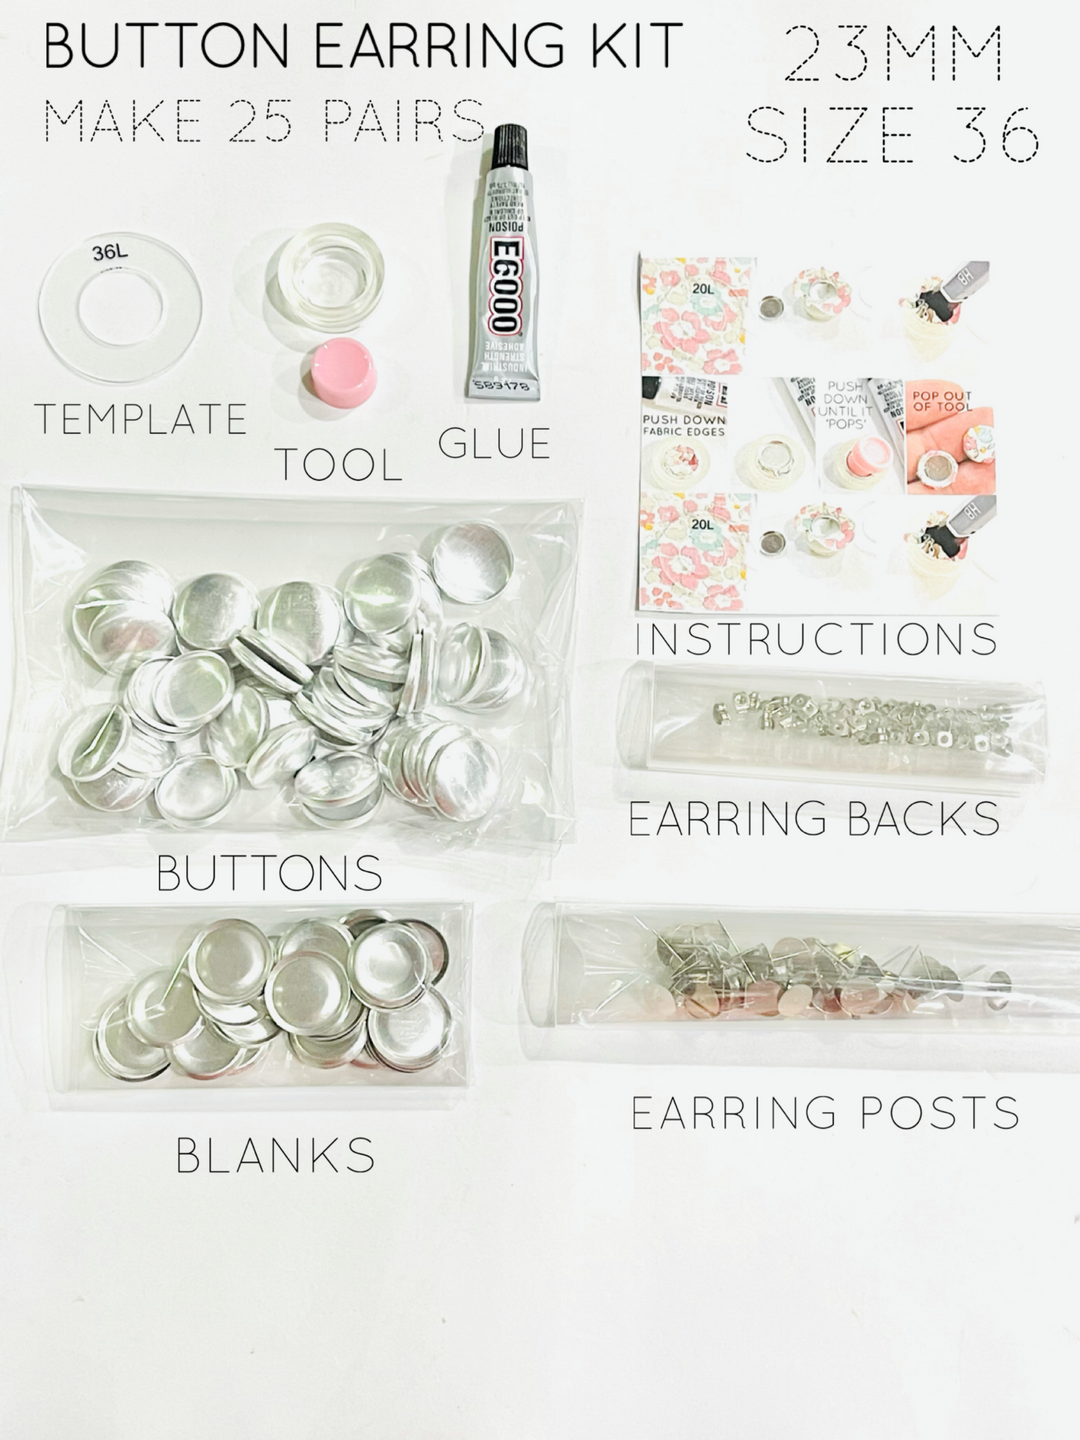 23mm Button Earring Self Cover Starter Kit - 25/50/100 Pairs - Oliver and May Everyday Range